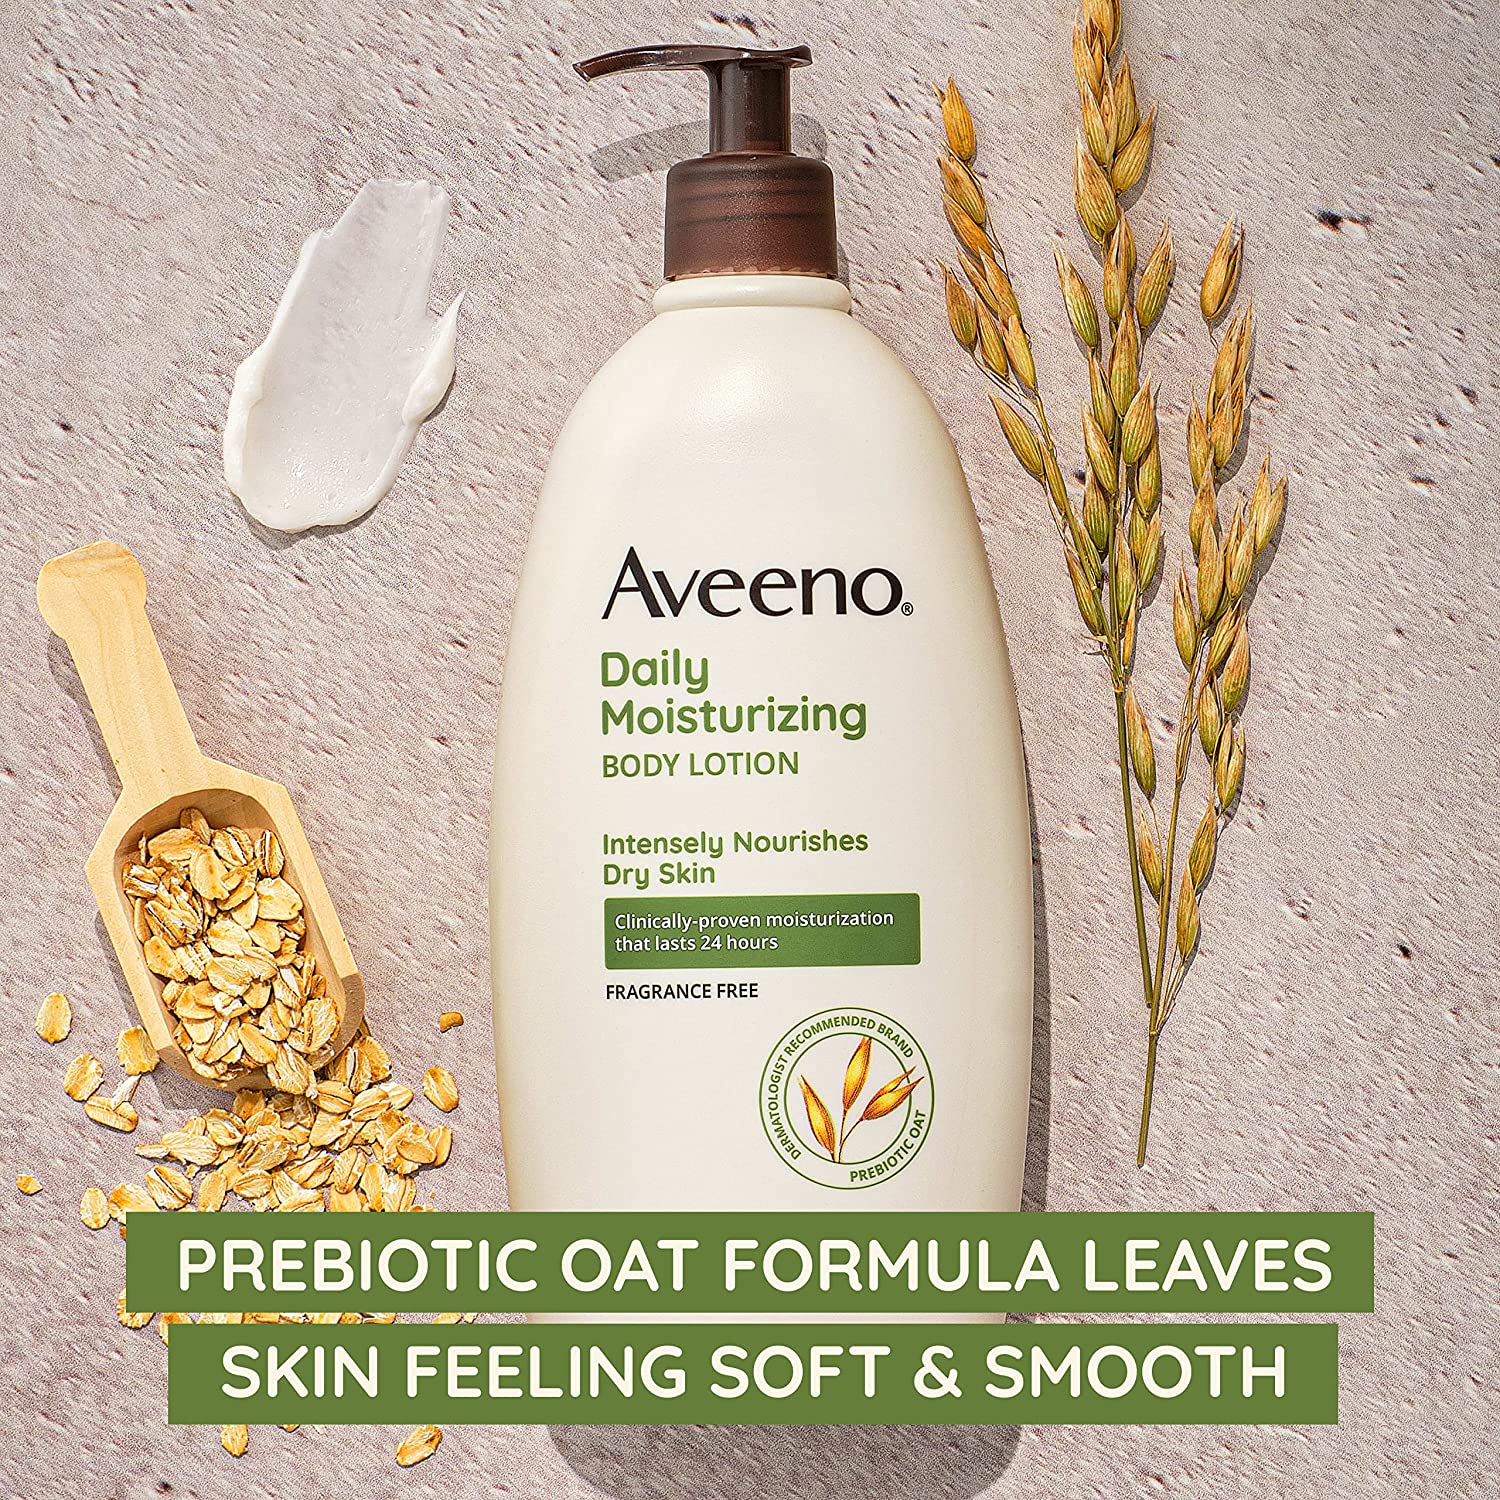 Aveeno Daily Moisturizing Body Lotion with Soothing Oat and Rich Emollients to Nourish Dry Skin, Fragrance-Free, 18 fl. oz 18 Fl Oz (Pack of 1) - image 5 of 6